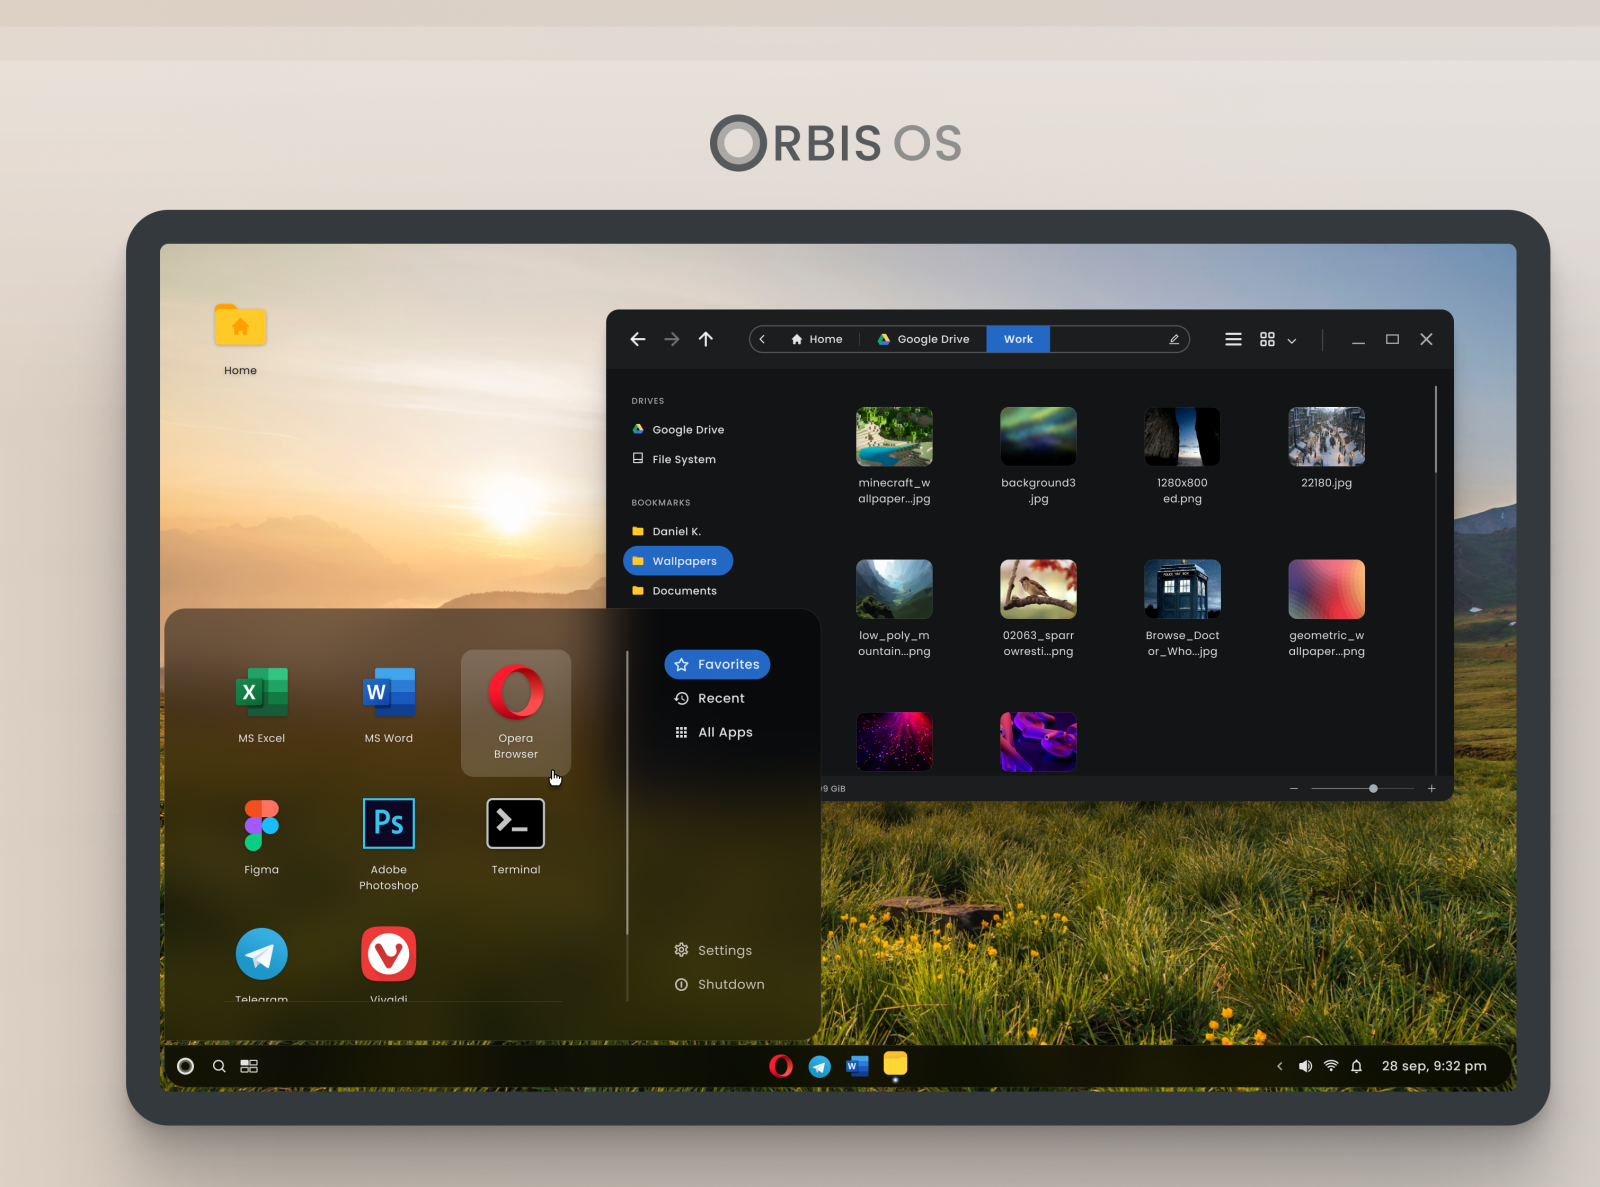 Orbis OS: the operating system concept by i.turkovsky on Dribbble